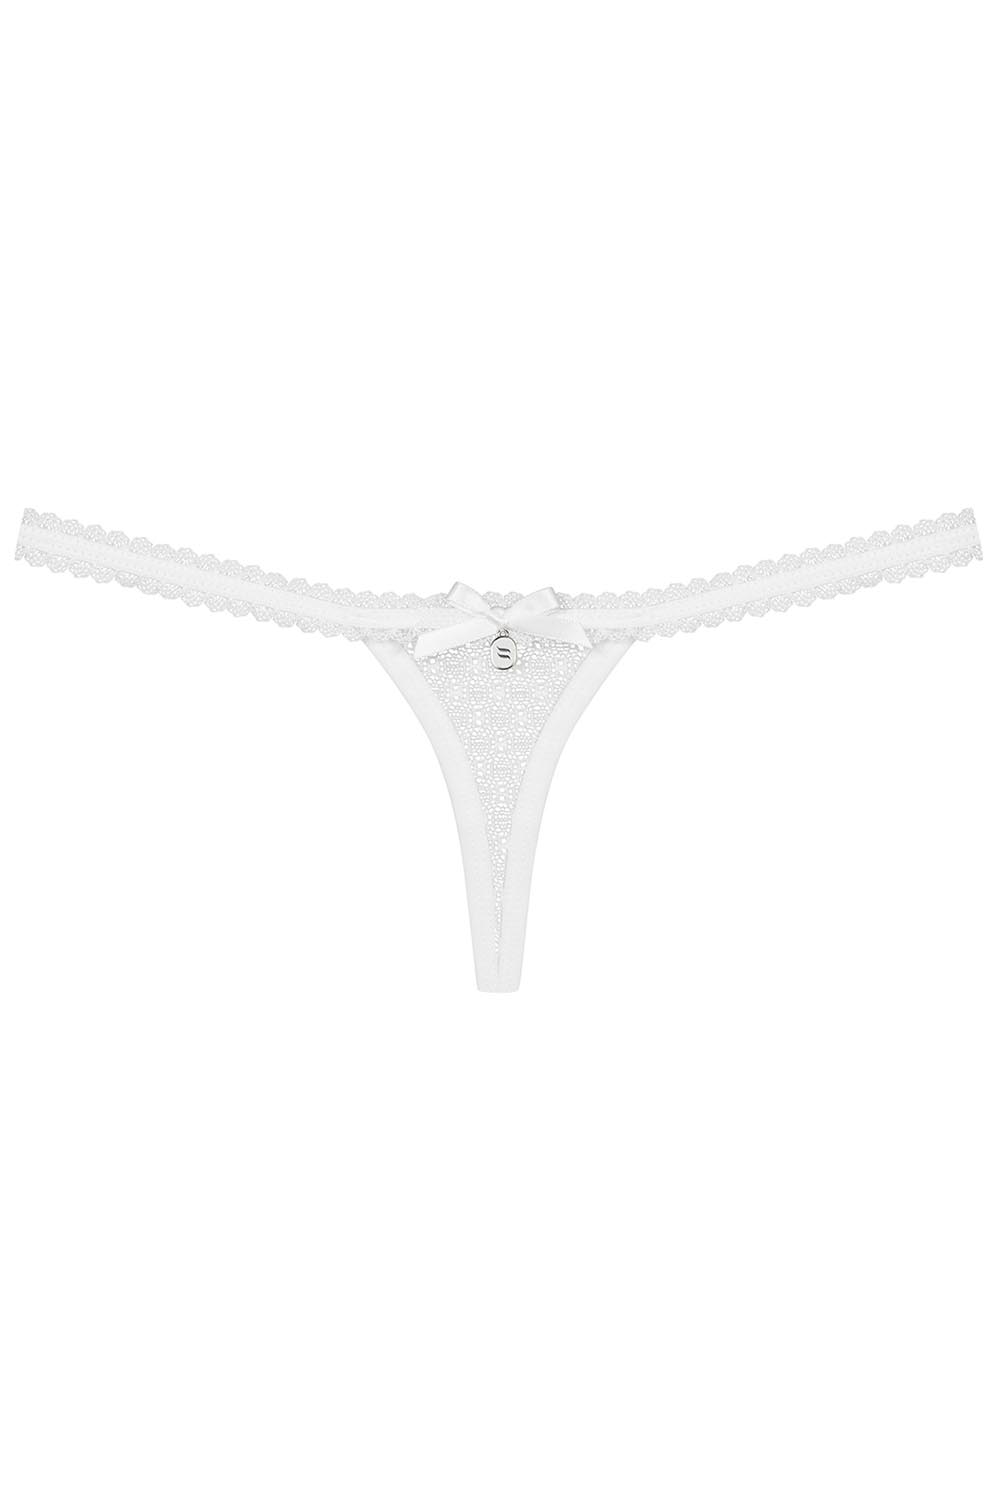 Obsessive women's sexy lace thong 843-THO-2 | White